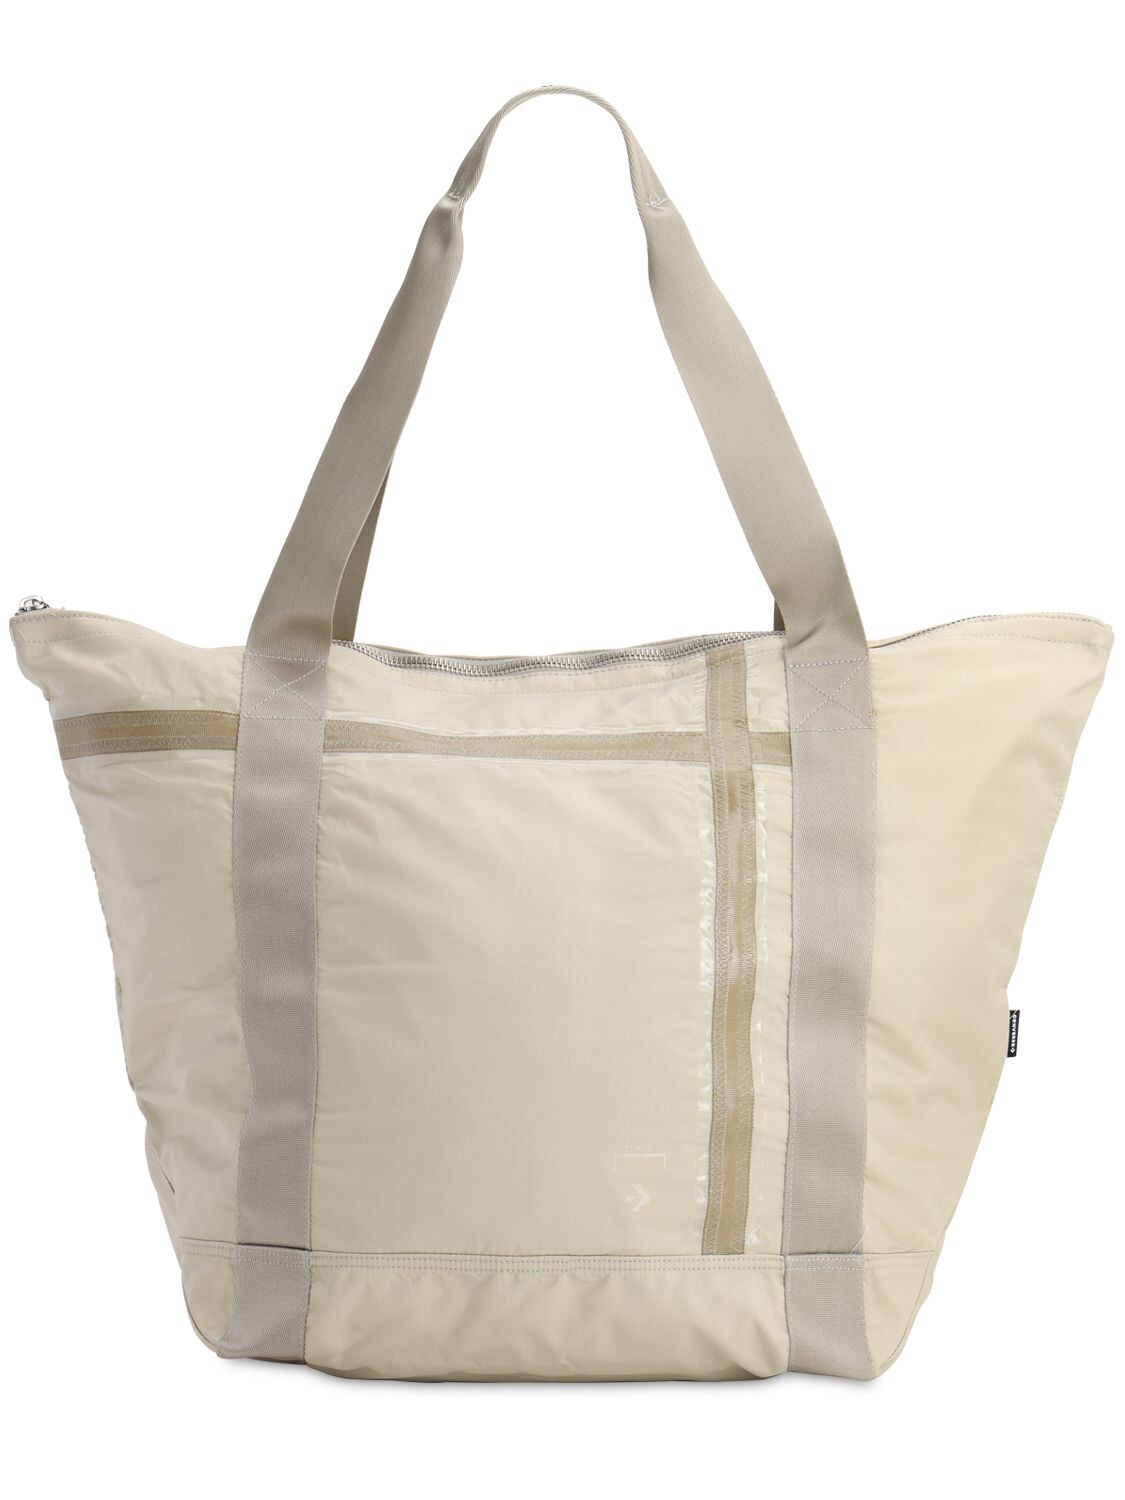 Image of A-cold-wall Tote Bag